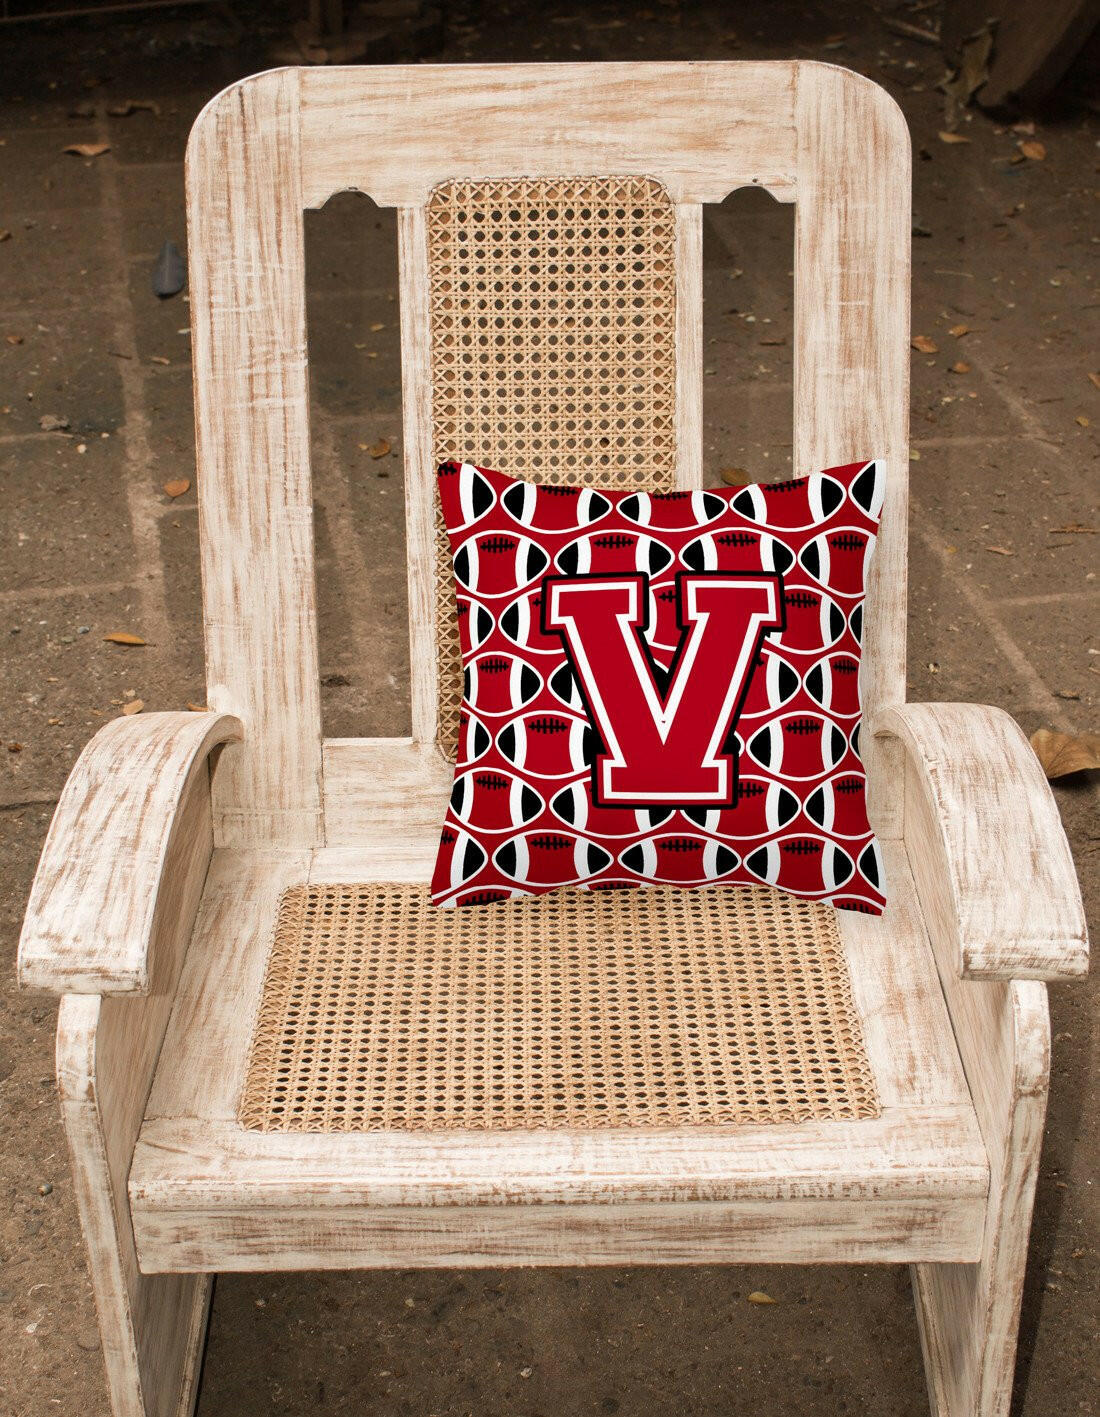 Letter V Football Red, Black and White Fabric Decorative Pillow CJ1073-VPW1414 by Caroline's Treasures